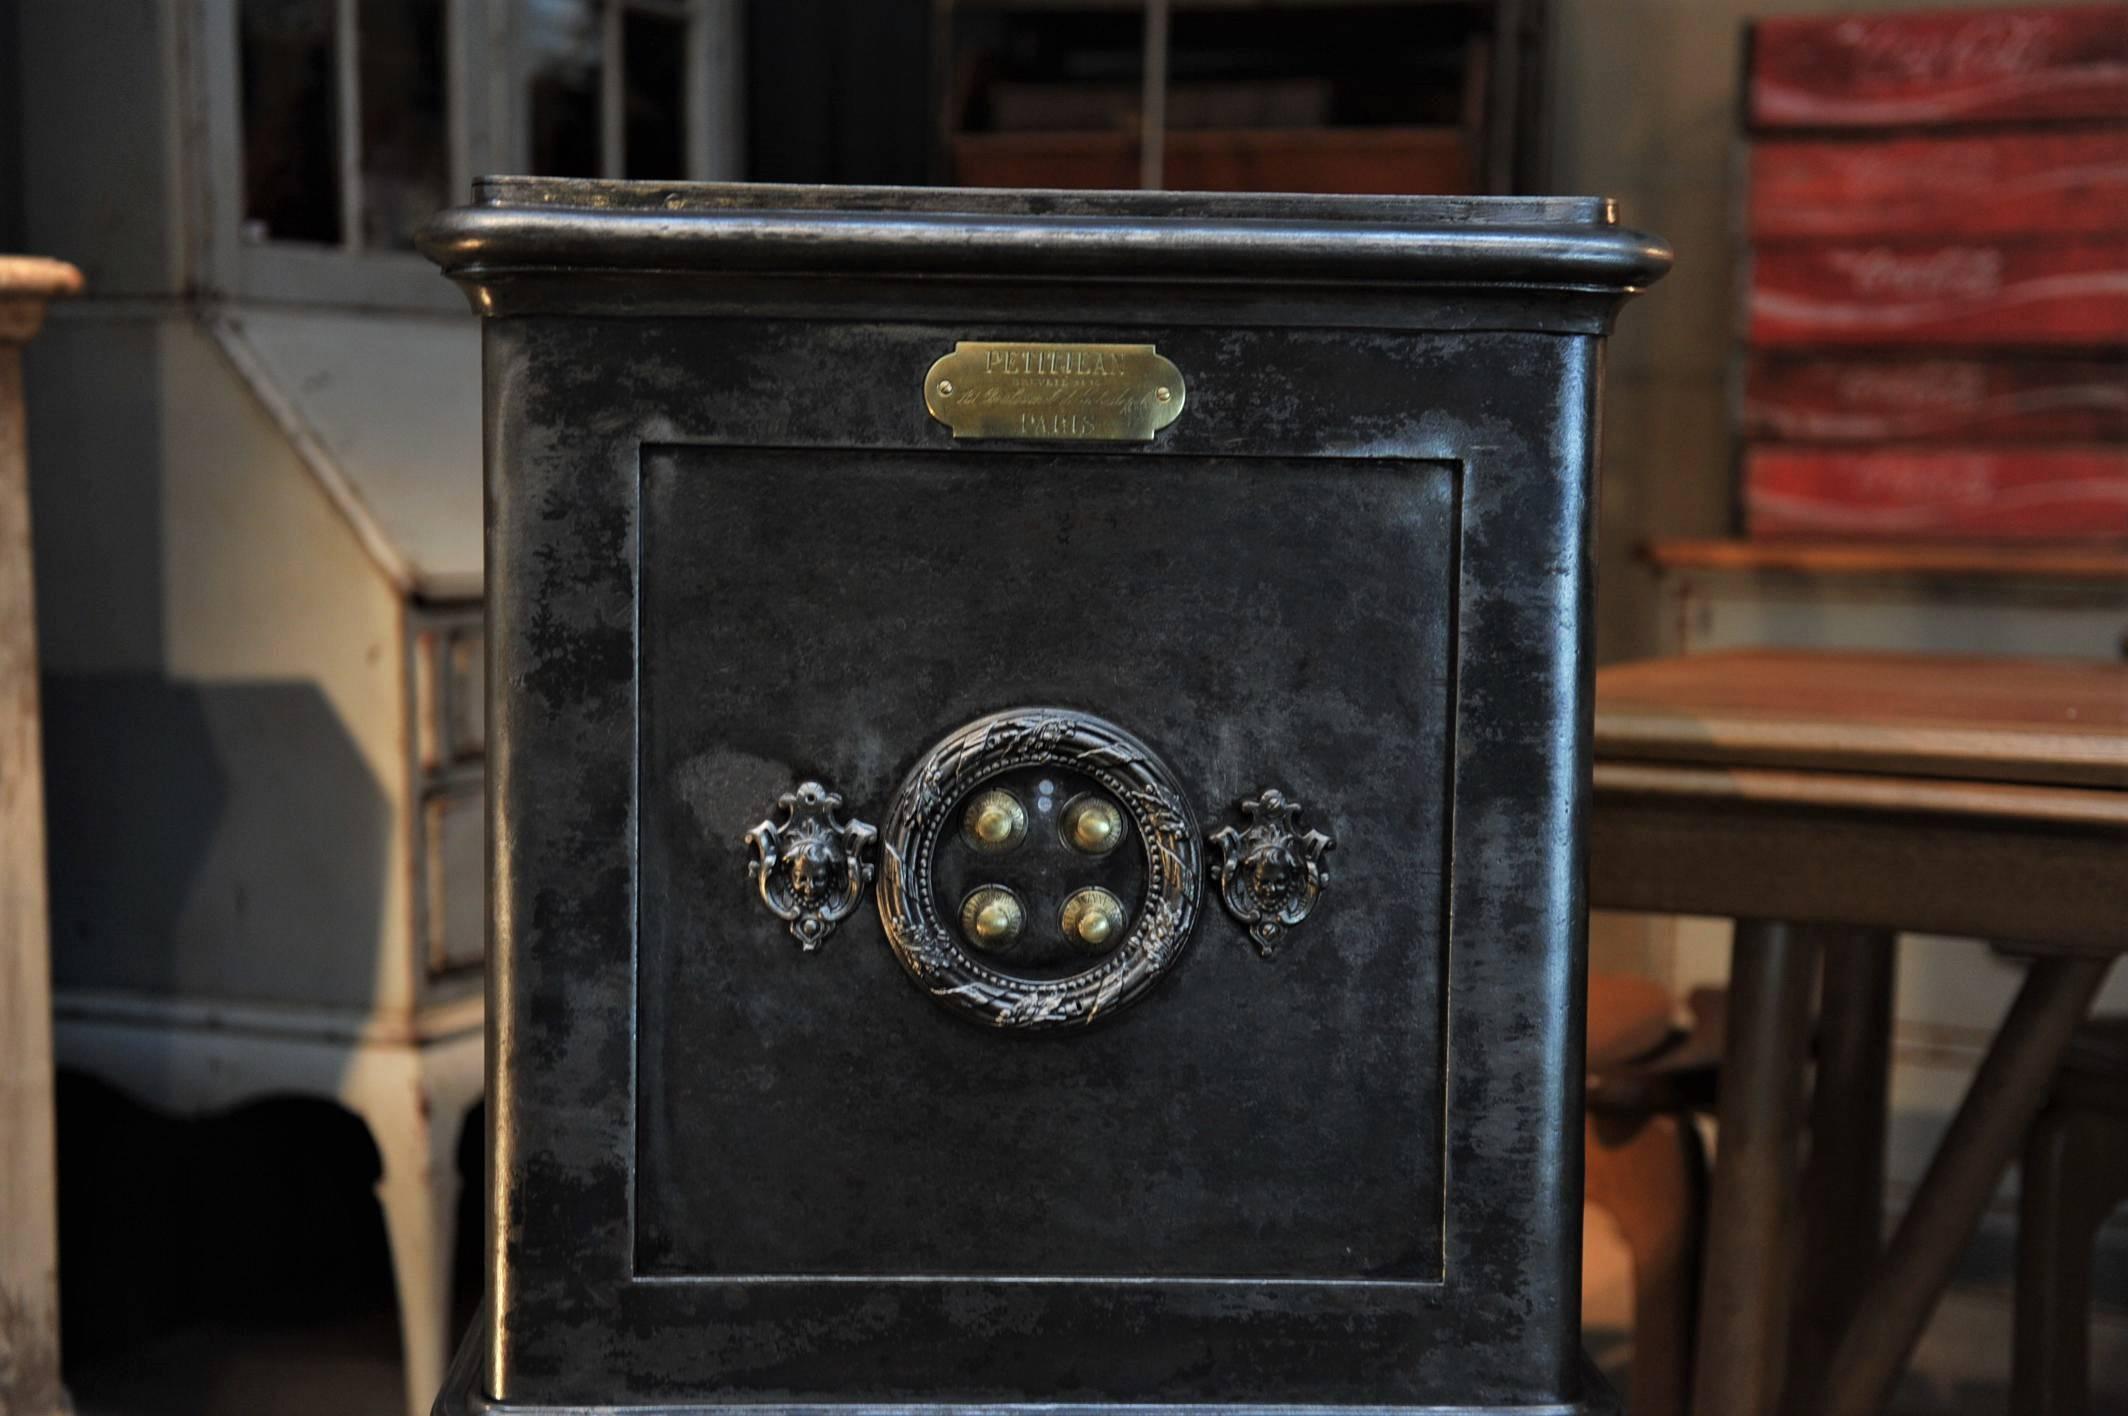 19th Century Iron and Wood Safe from Petitjean Paris with All Keys 3